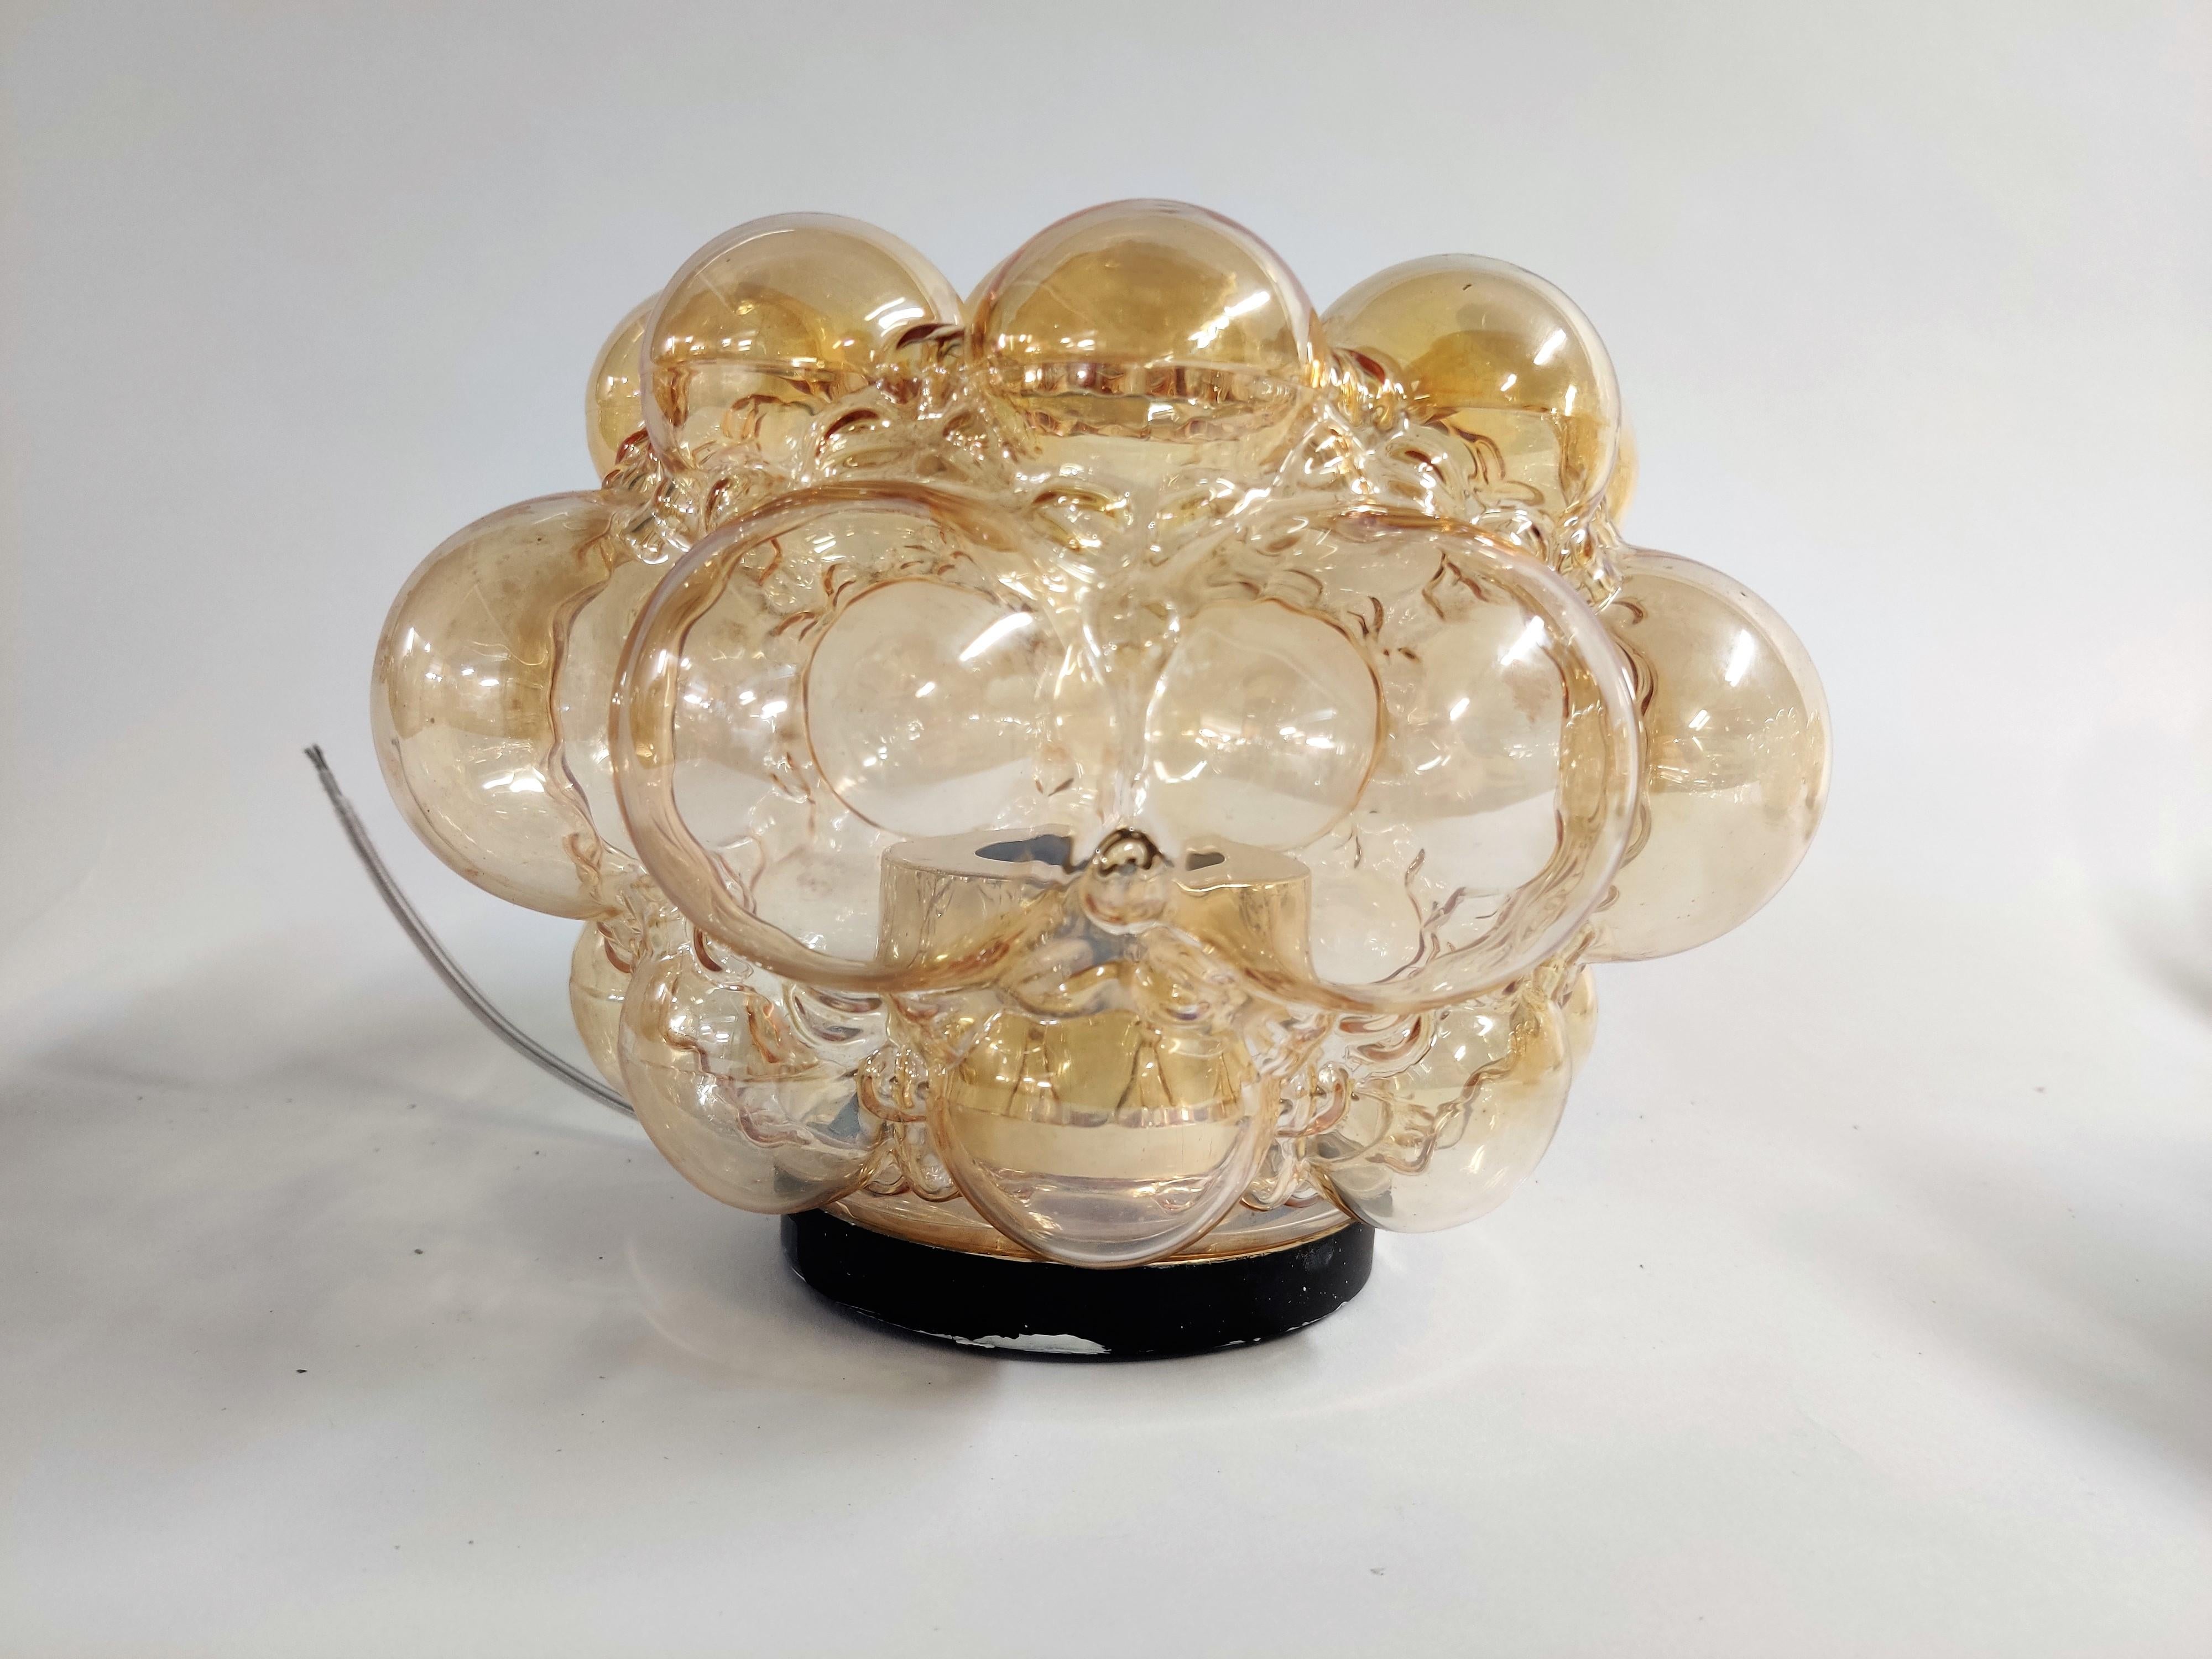 Flush mount ceiling light with 'bubble' glass amber colored designed by Helena Tynell for Glashütte Limburg.

Emits a beautiful warm and diffuse light.

Brass shade holders

1960s, Germany

Tested and ready to use with a regular E27 light